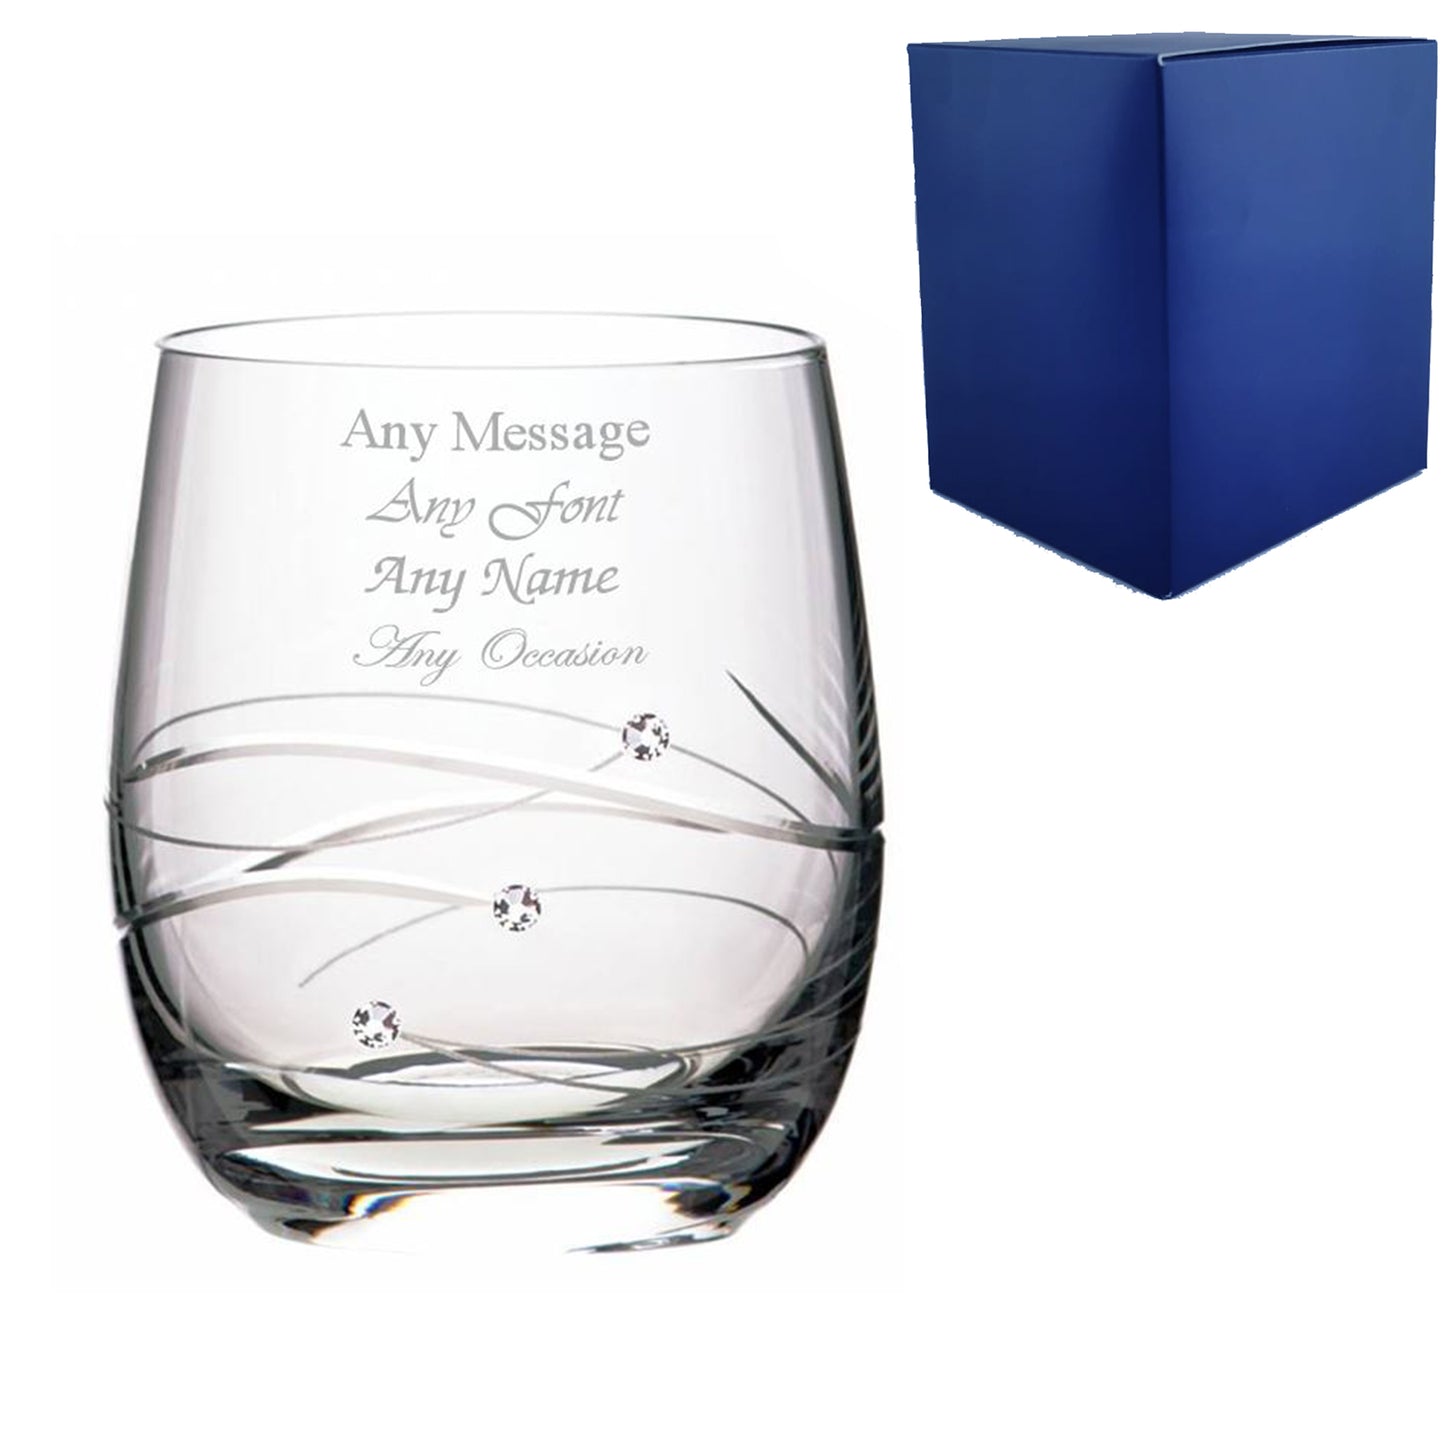 Engraved Single Diamante Whisky Tumbler with Spiral Design Cutting With Gift Box Image 2